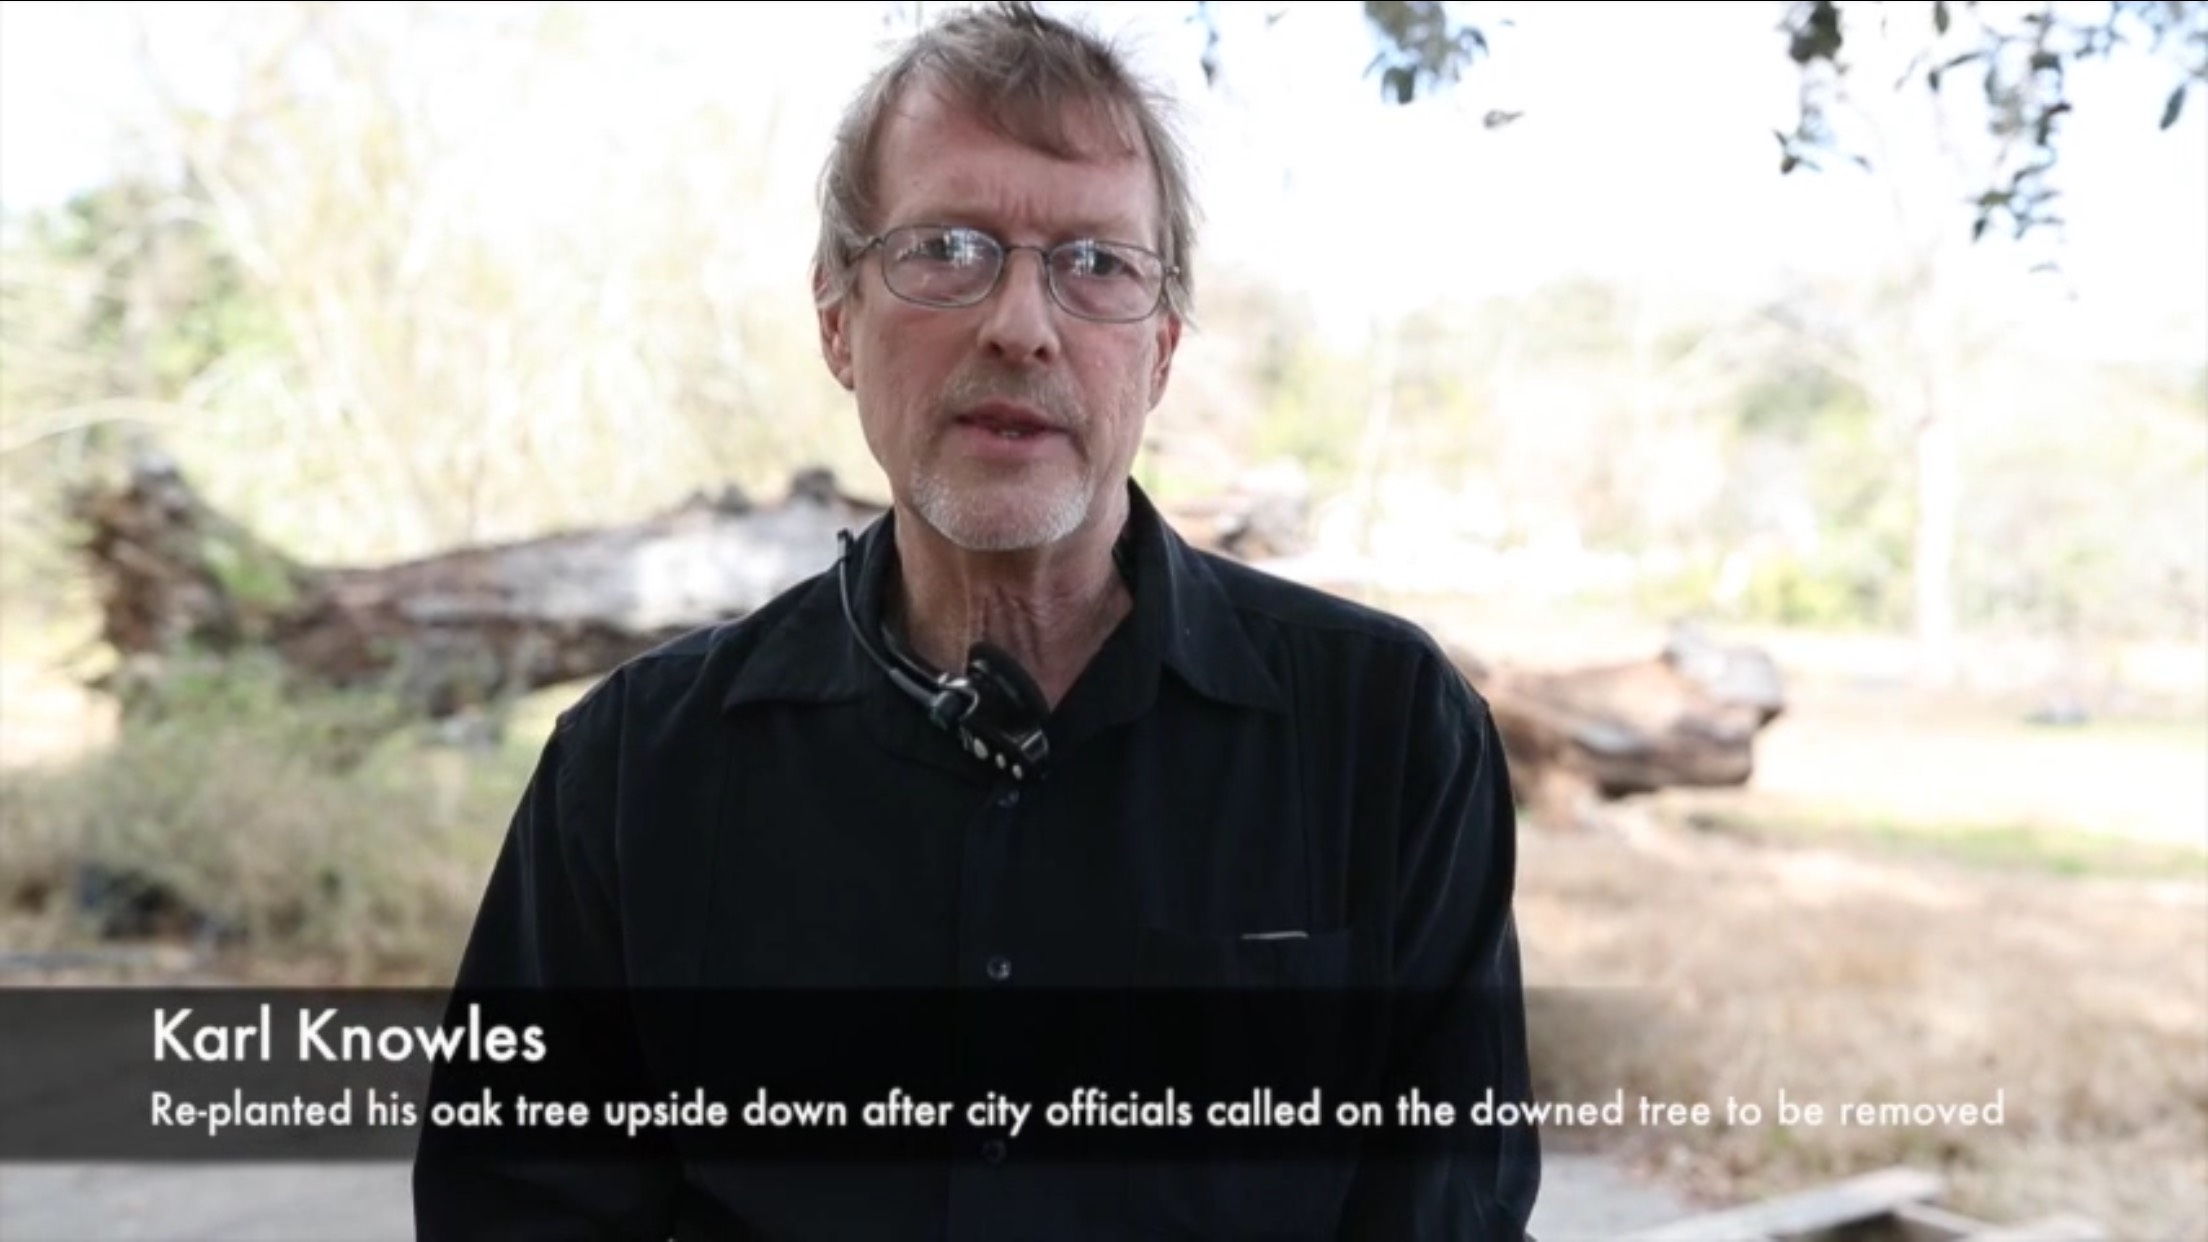 Karl Knowles: Replanted his oak tree upside down after city officials called on the downed tree to be removed.